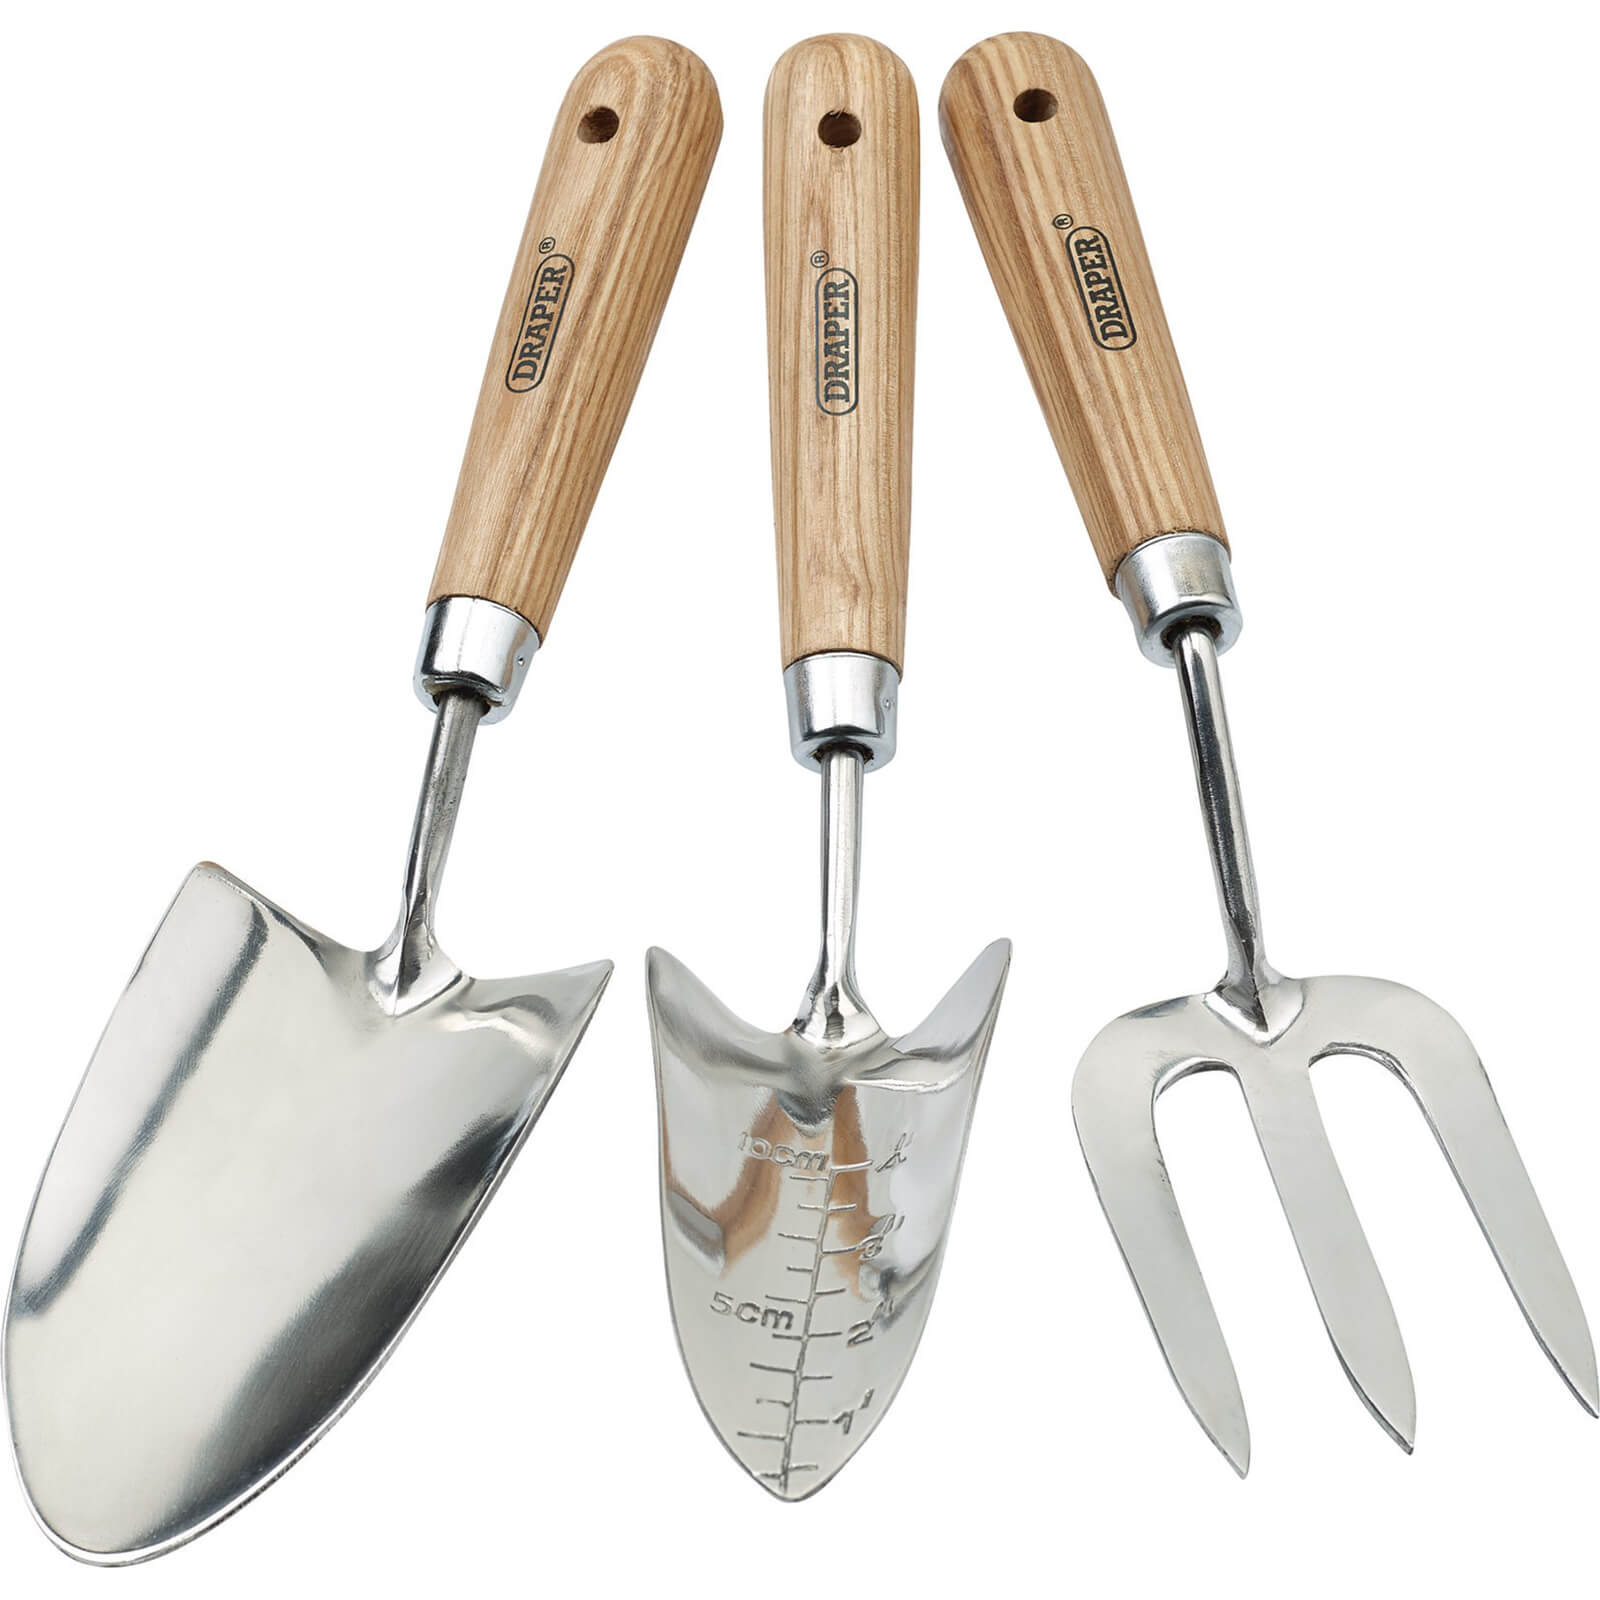 Image of Draper Expert 3 Piece Stainless Steel Hand Fork and Trowel Set